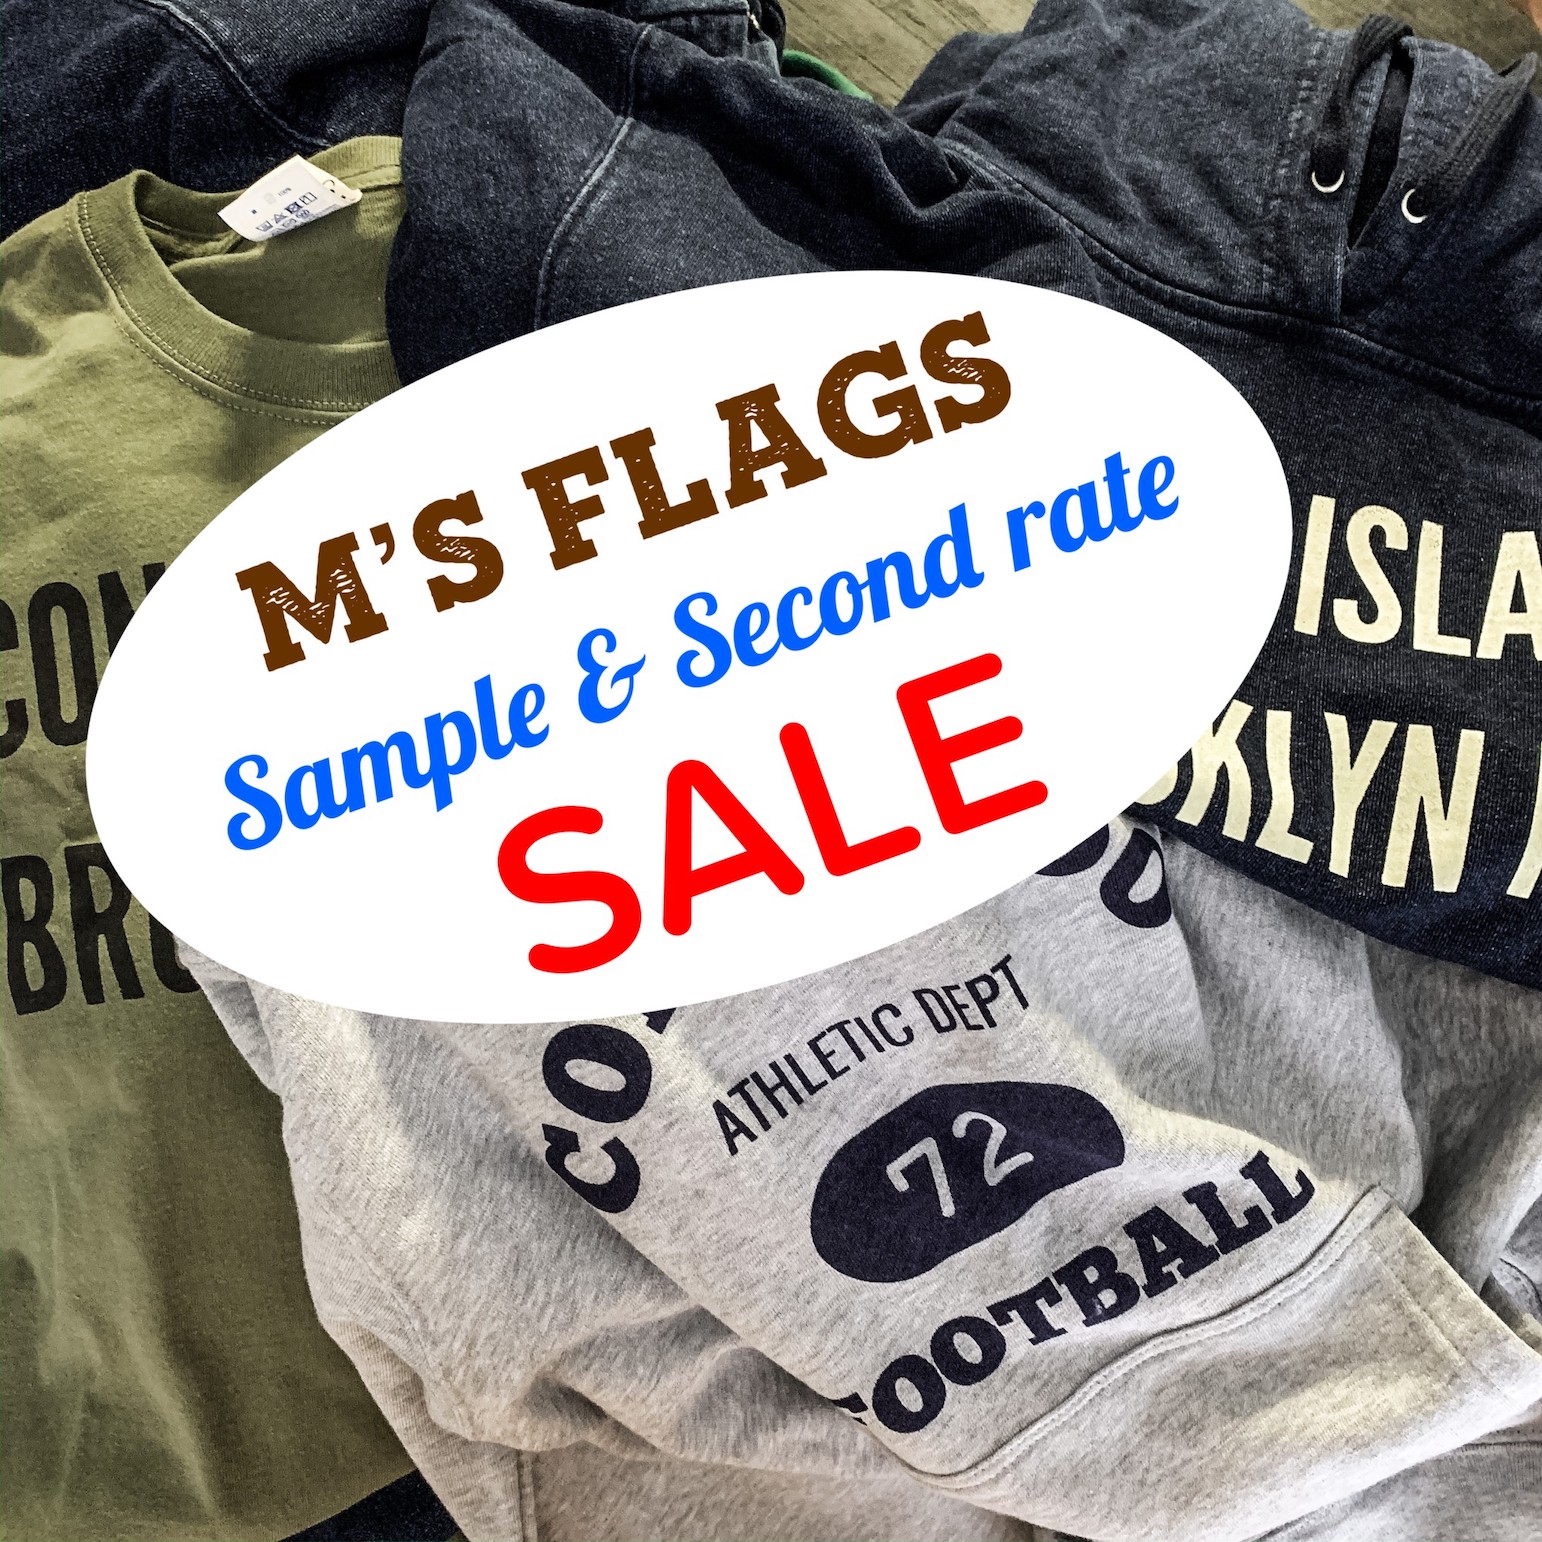 【M's FLAGS Sample & Second rate SALE】